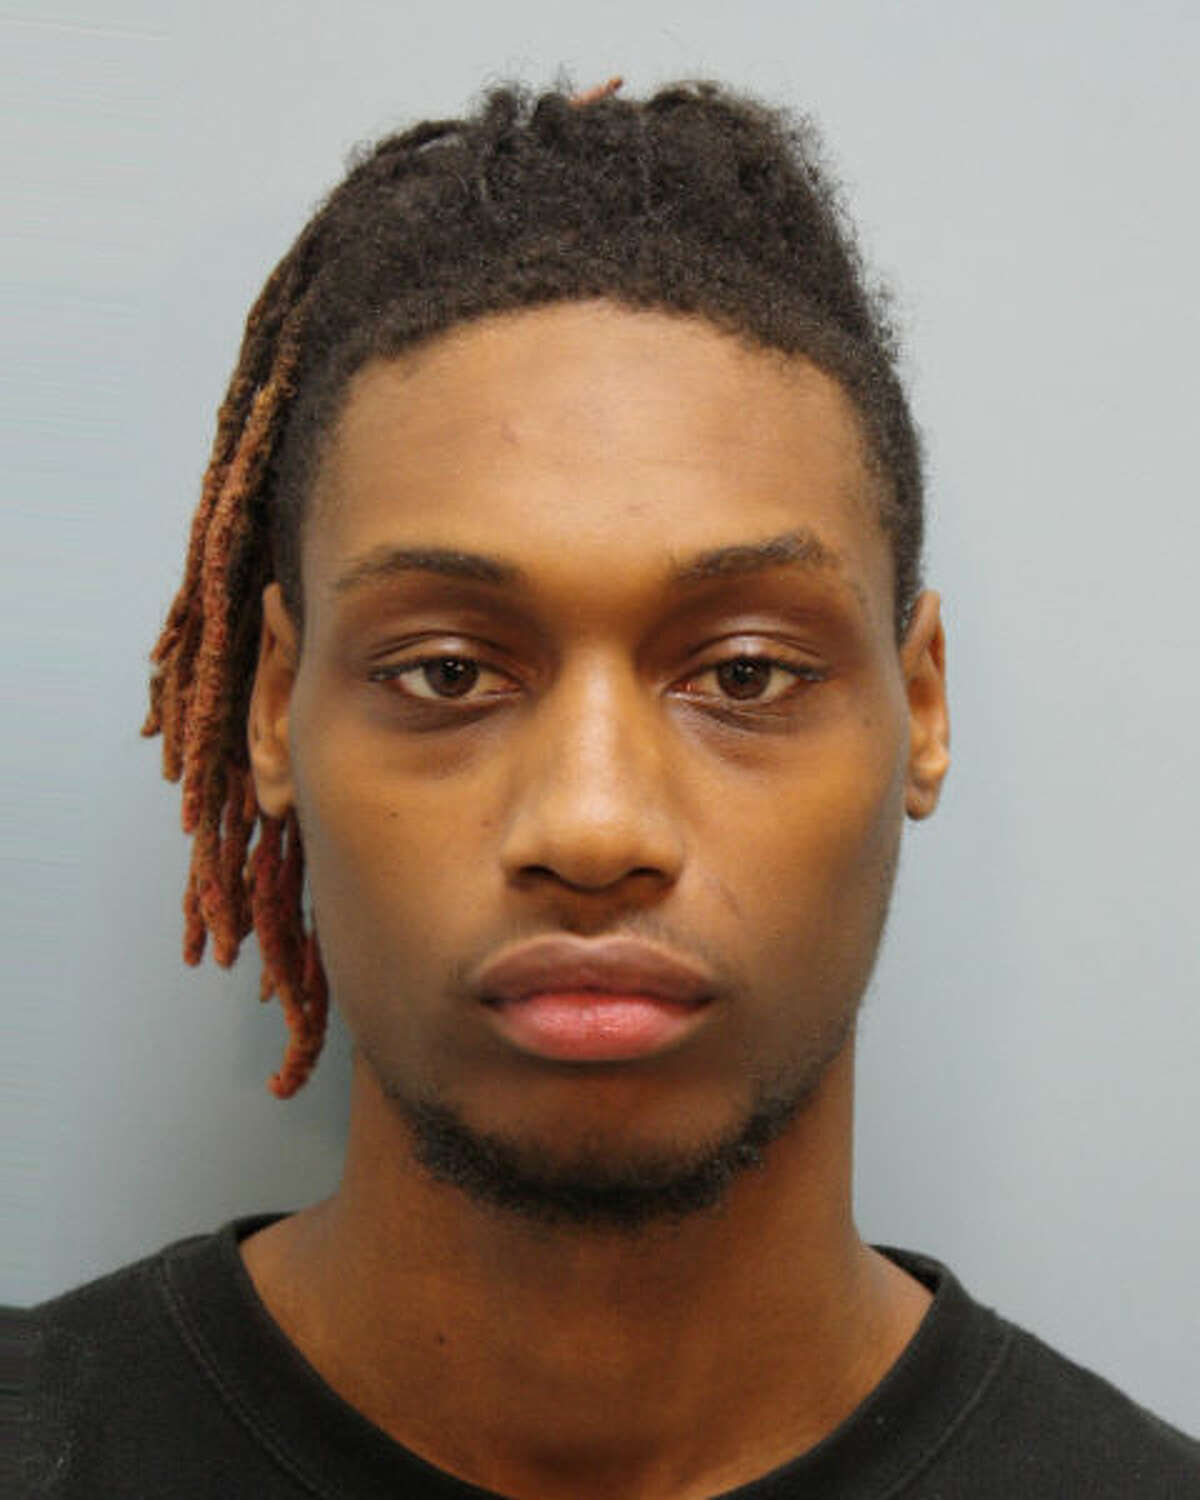 Dwayne Ernest Wharton, 19, was arrested late Monday and charged with capital murder in connection with the death of Leandro Morales, Jr., 47. He is the second suspect to be arrested over the deadly incident.